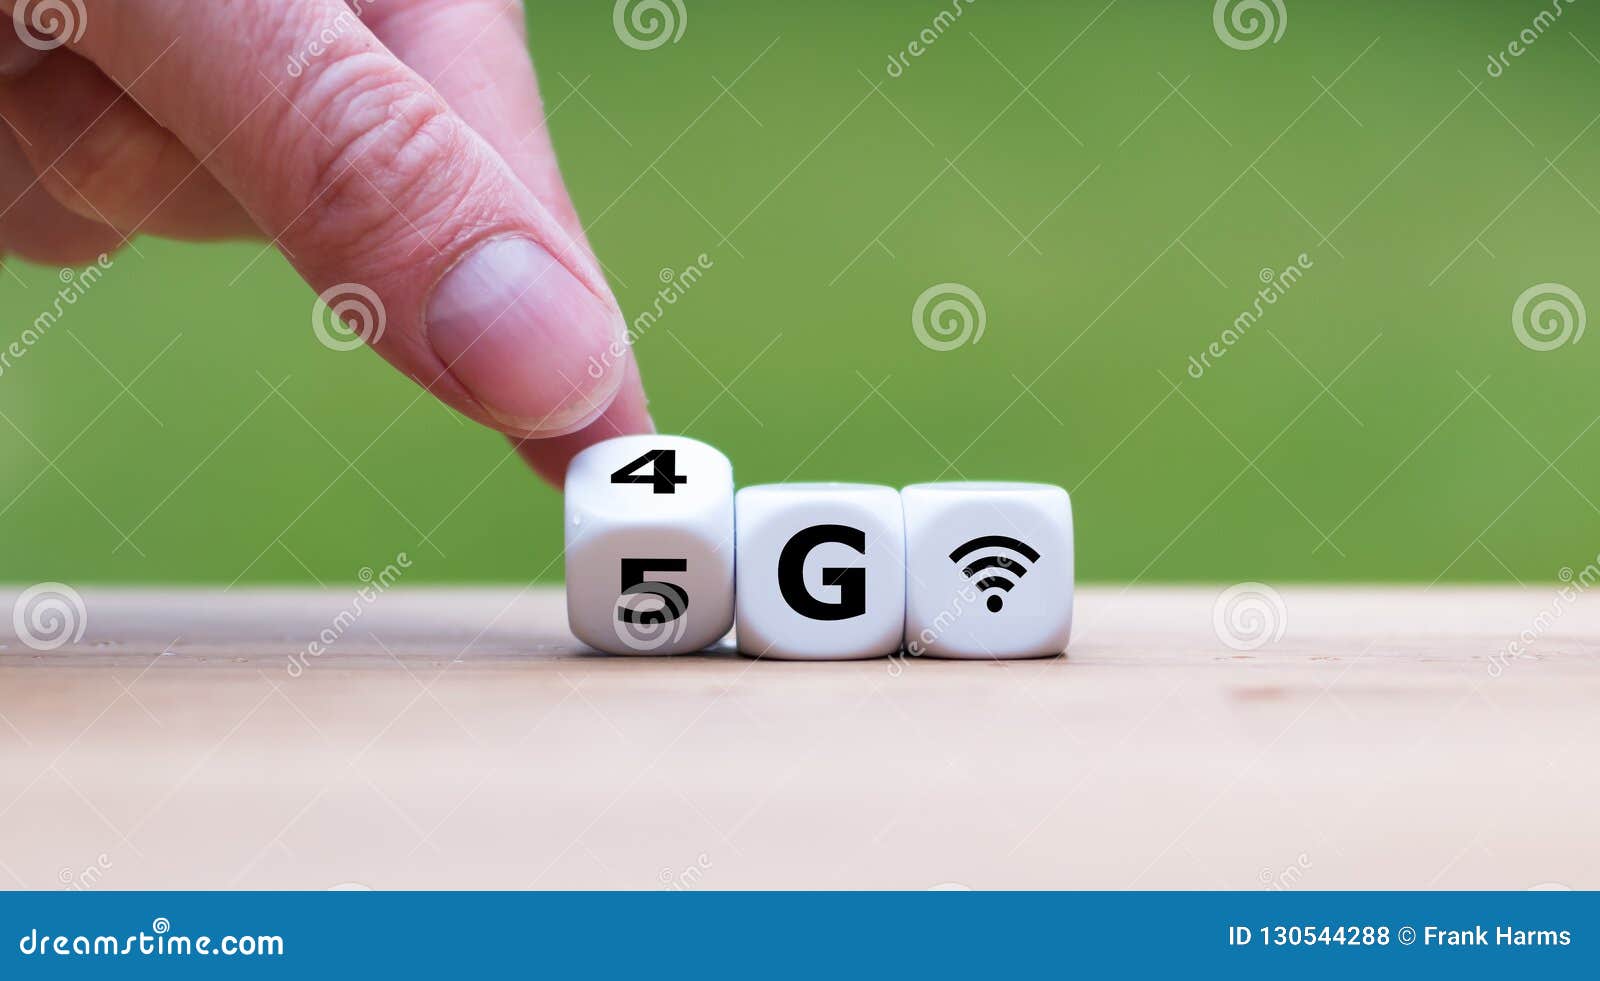 the change from 4g to 5g